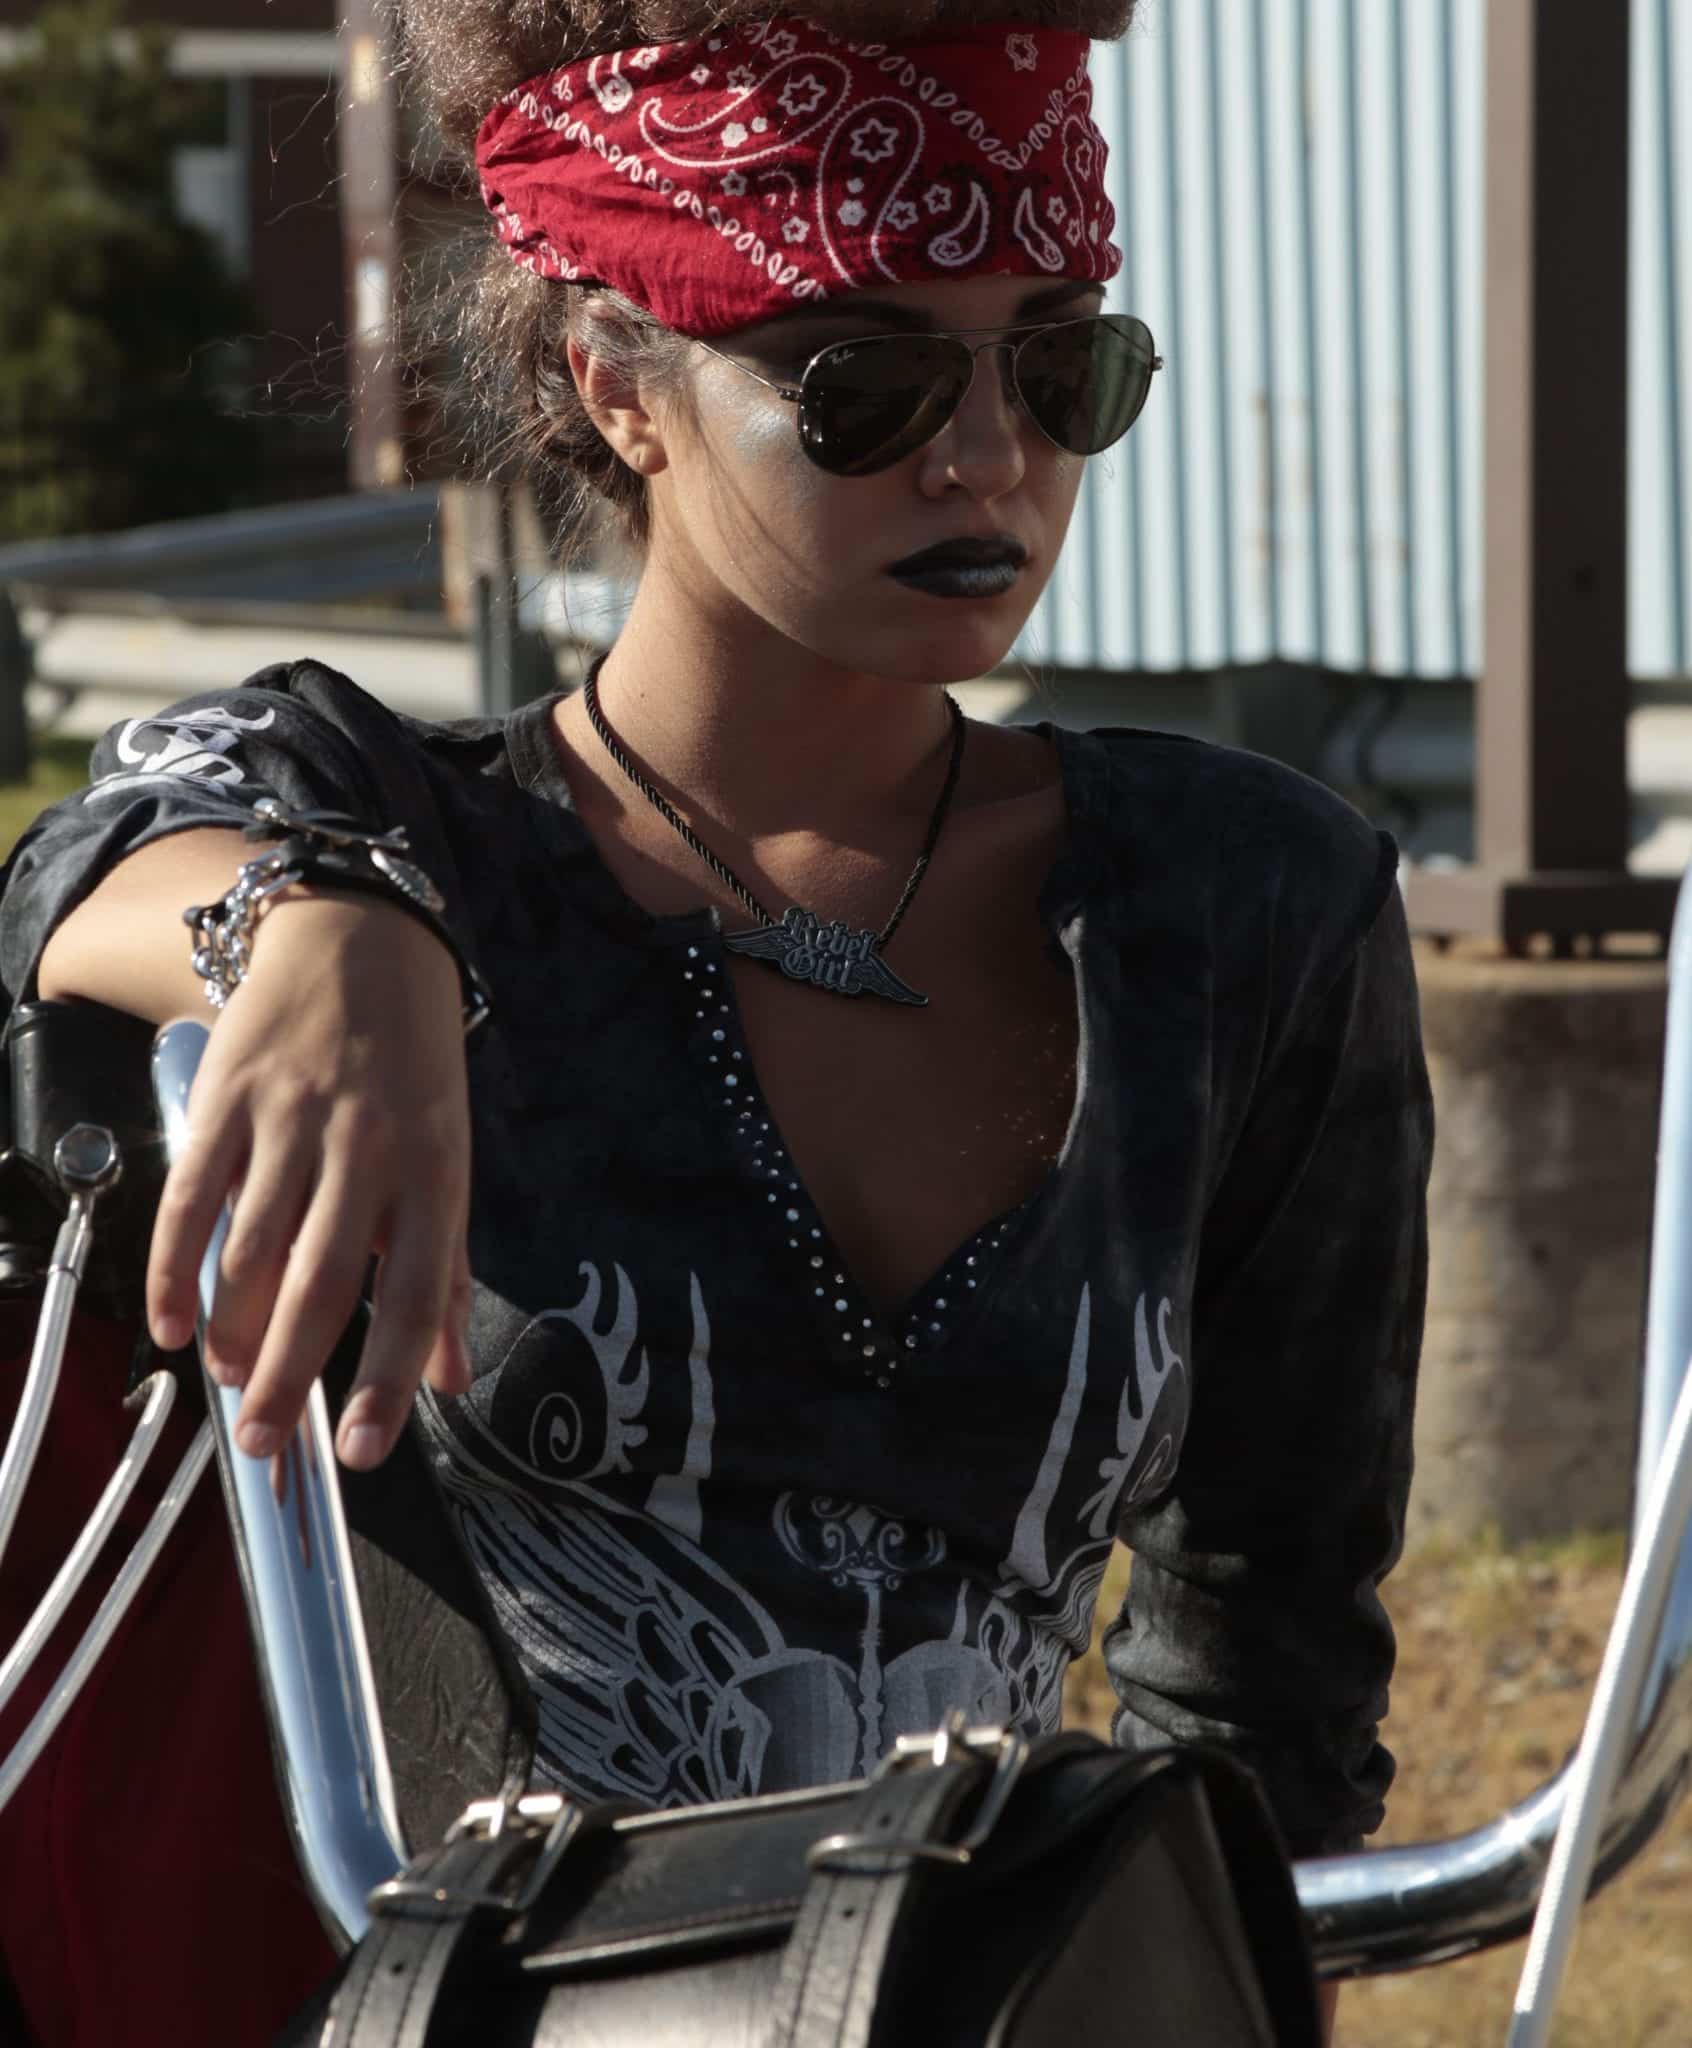 15 Best Bandana Outfits Combinations for A Perfect Bandana Look